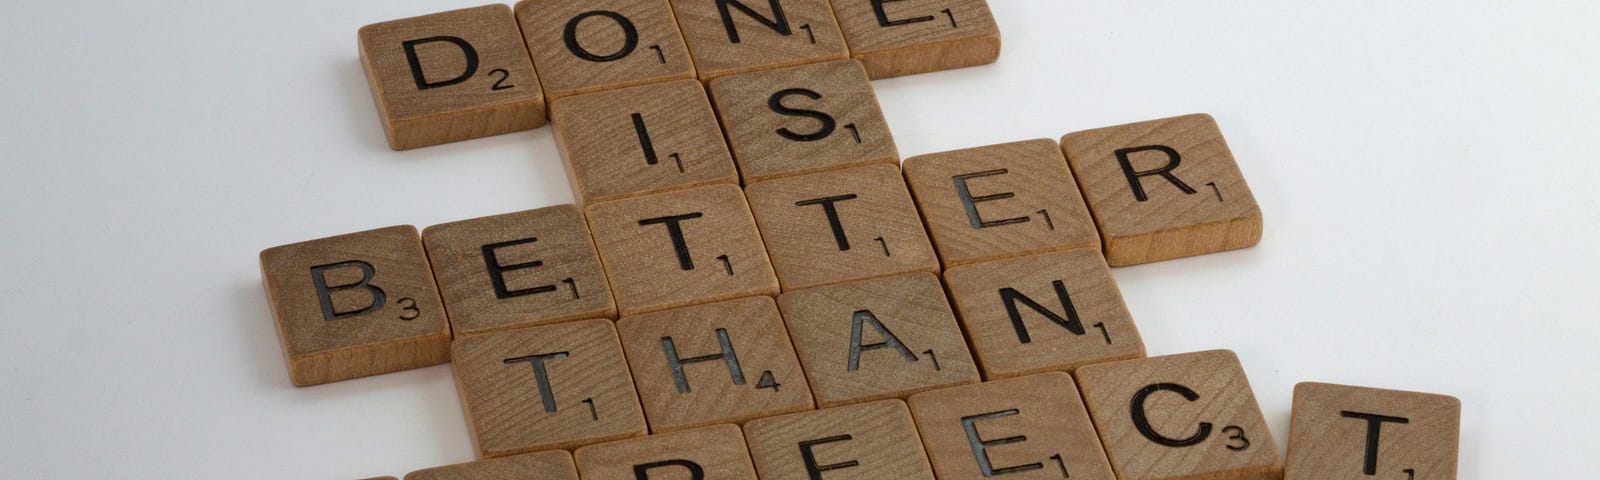 Scrabble pieces spelling out “Done is Better Than Perfect.”